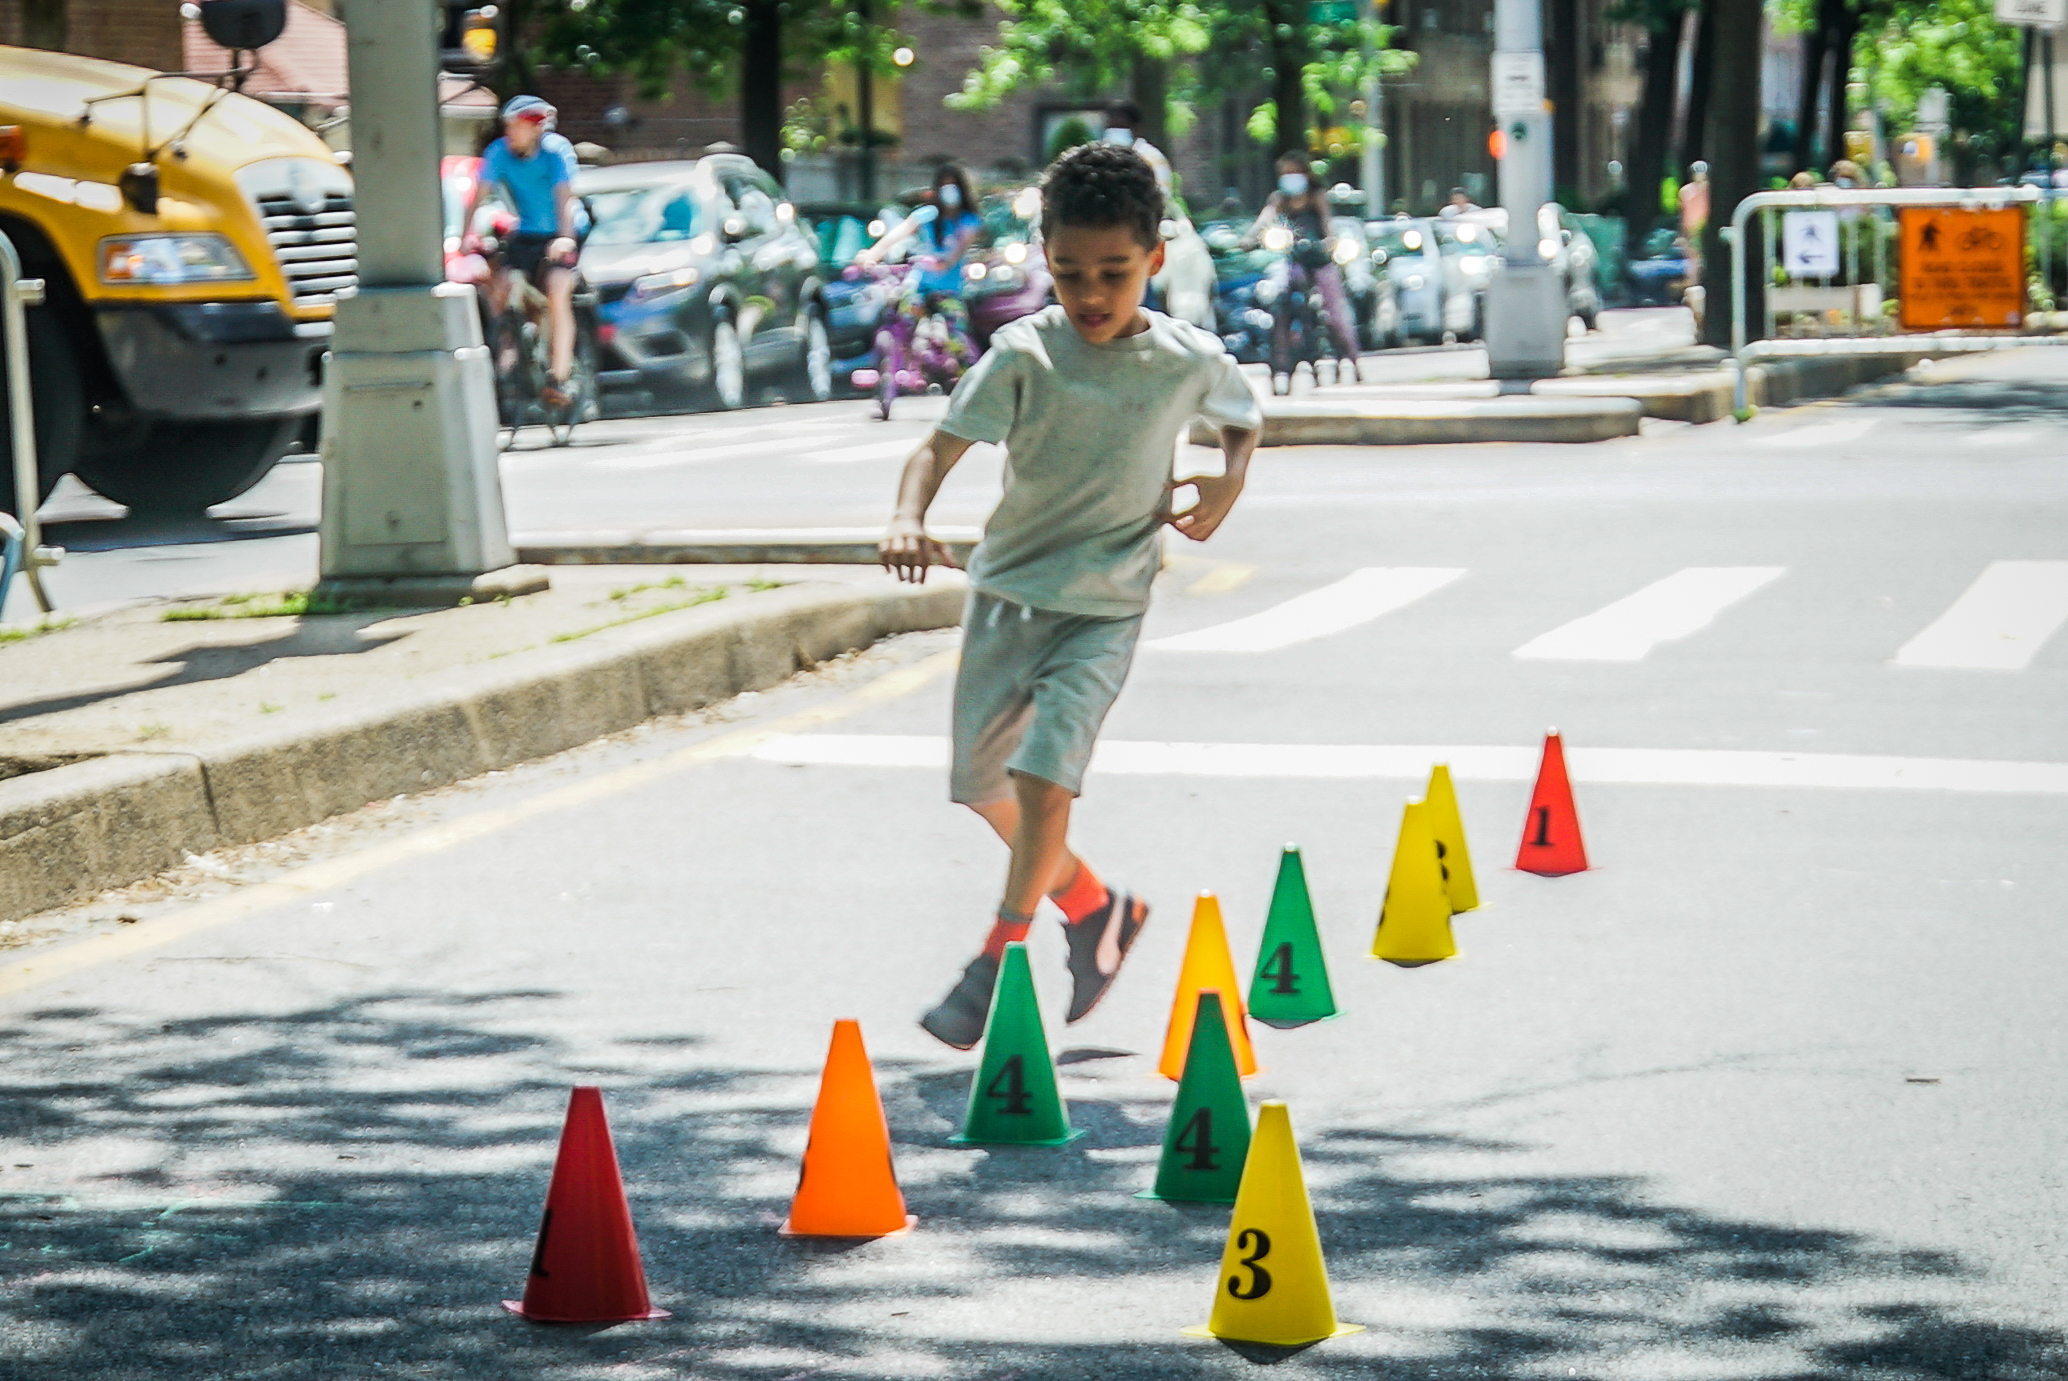 A young boy runs through the obstacle course as part of the Coalition's activities. He is maneuvering between small, colorful cones that have been set up on the street to create the obstacle course